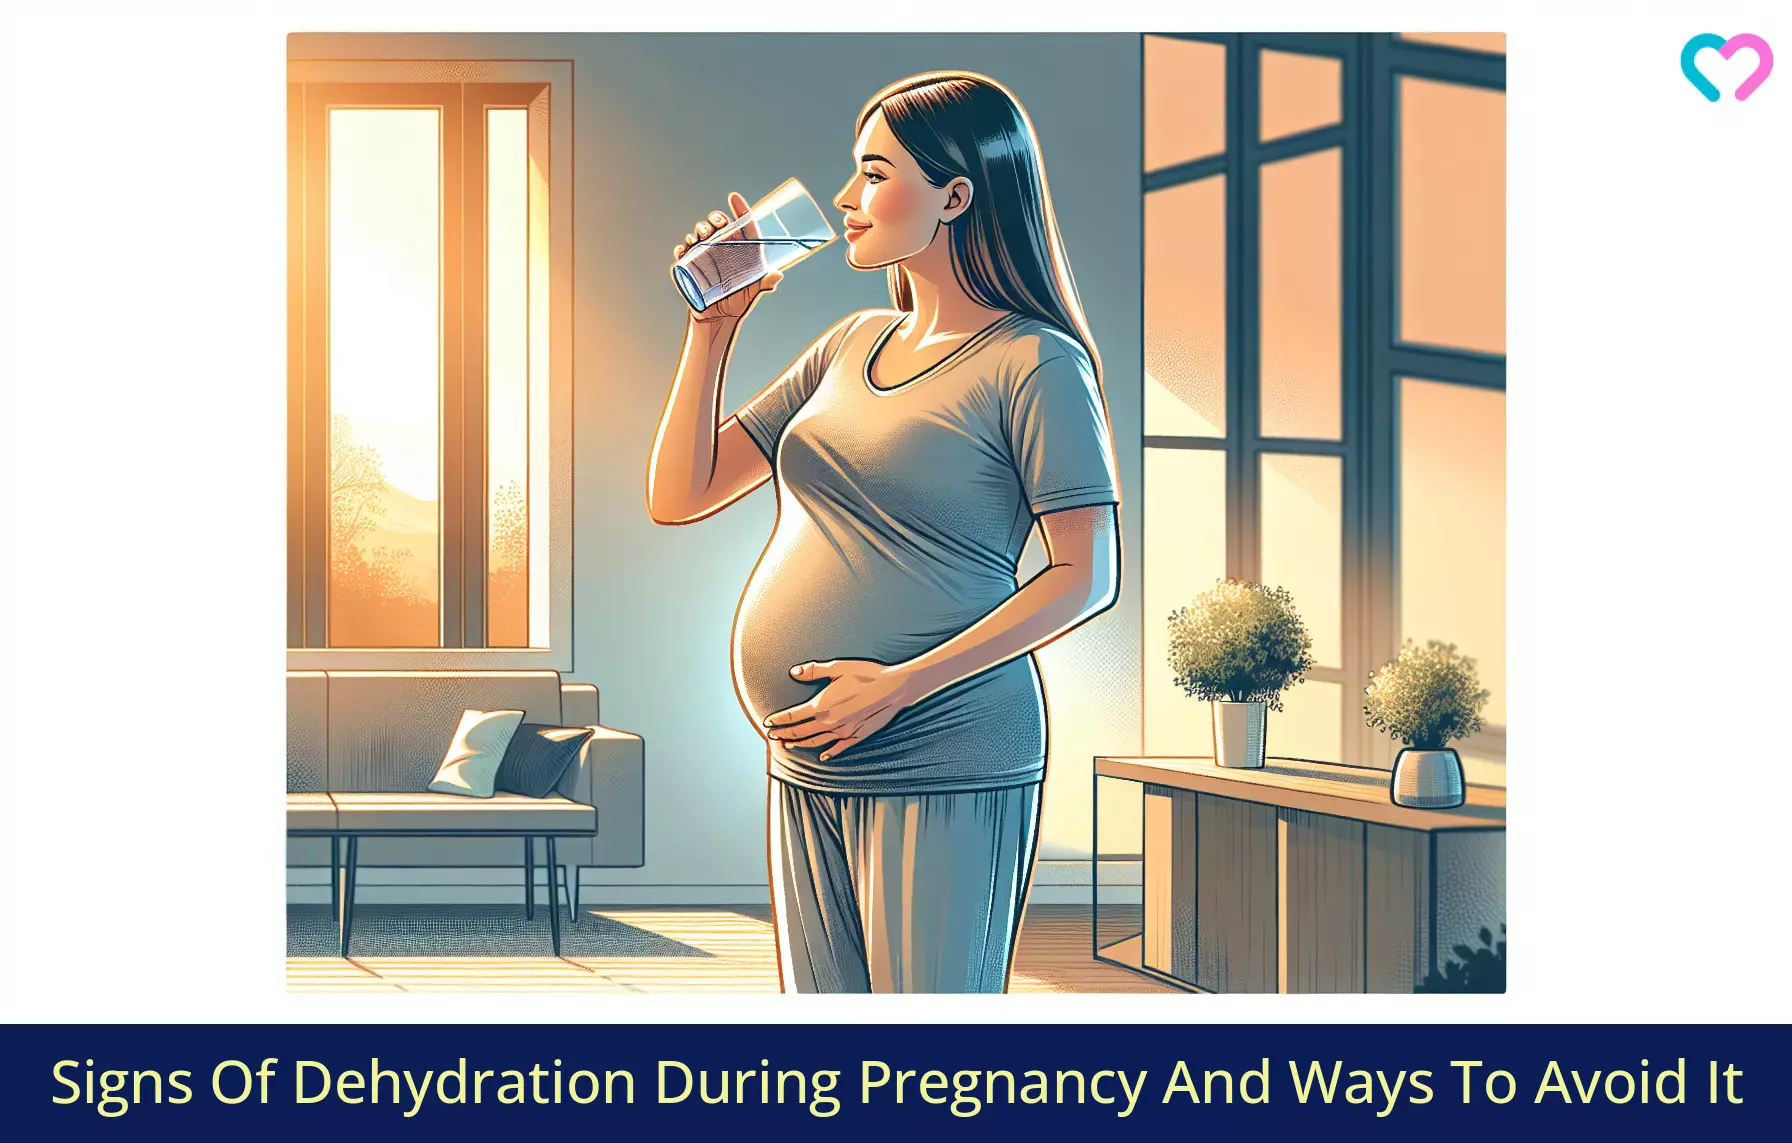 signs of dehydration in pregnancy_illustration